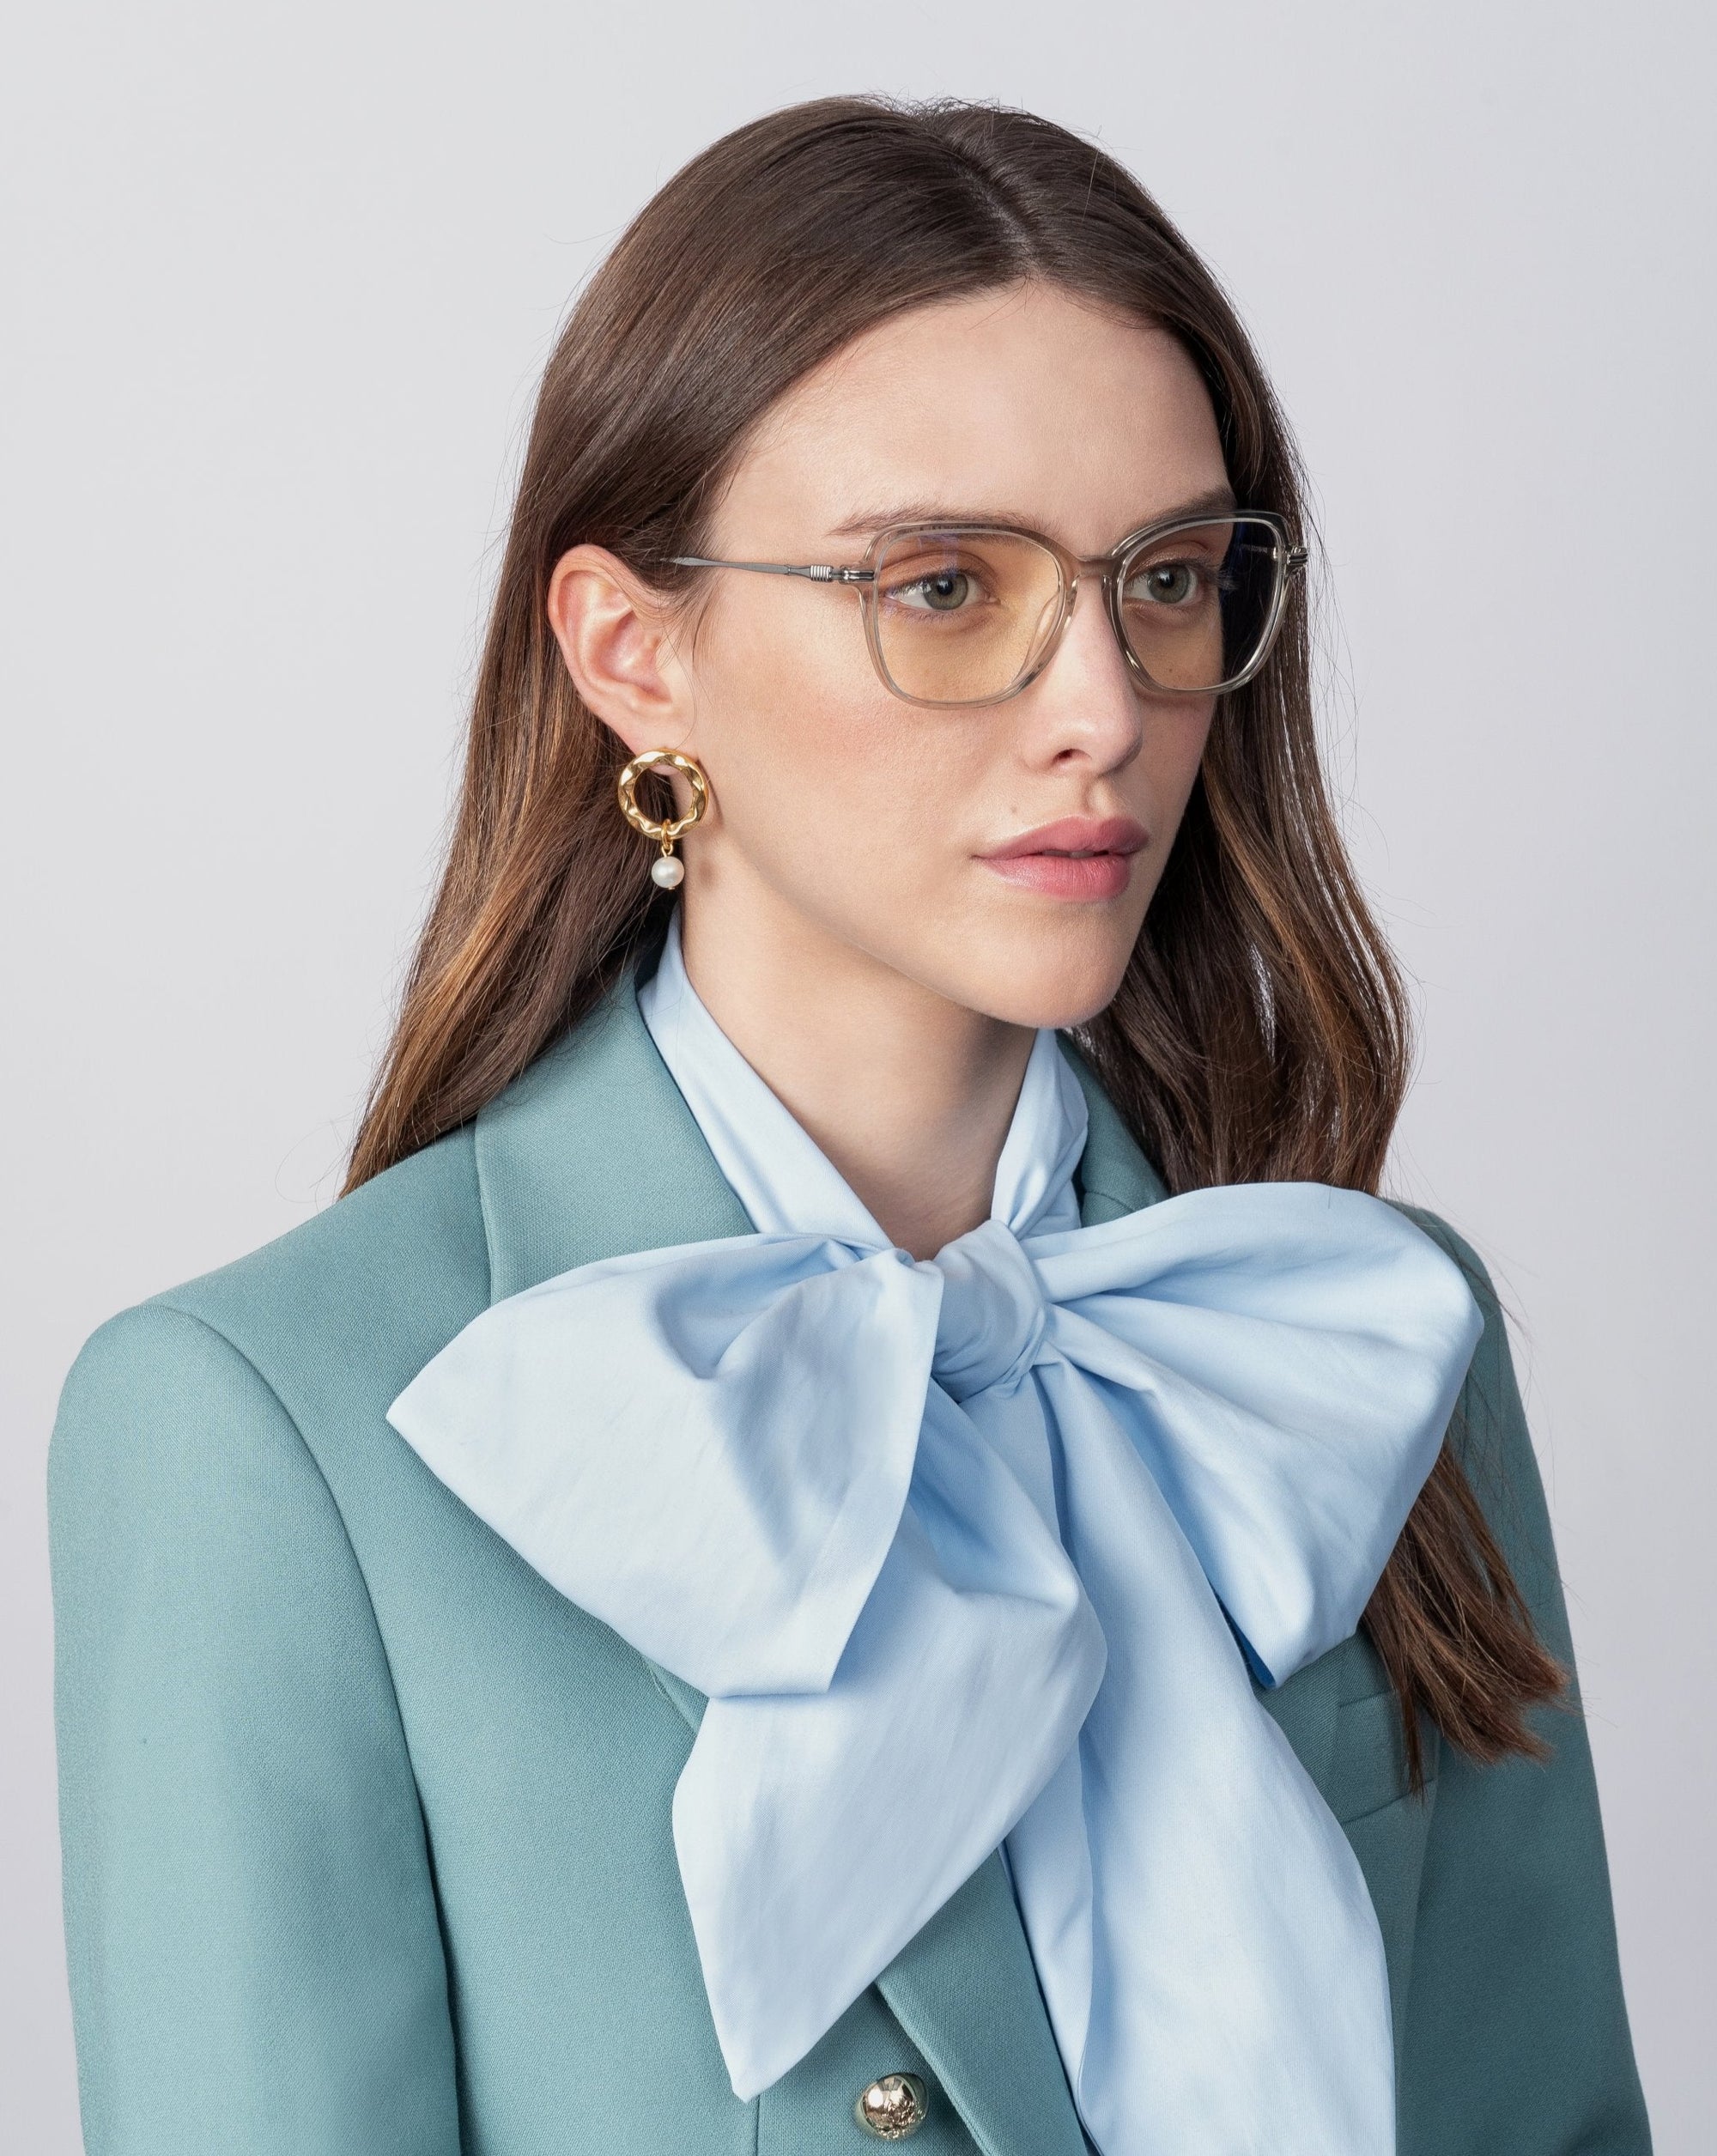 A person with long brown hair and glasses with prescription lenses is shown from the shoulders up, wearing a green blazer and a large light blue bow tie. They have 18-karat gold-plated earrings by For Art&#39;s Sake® Sonnet and a neutral expression against a plain light background.